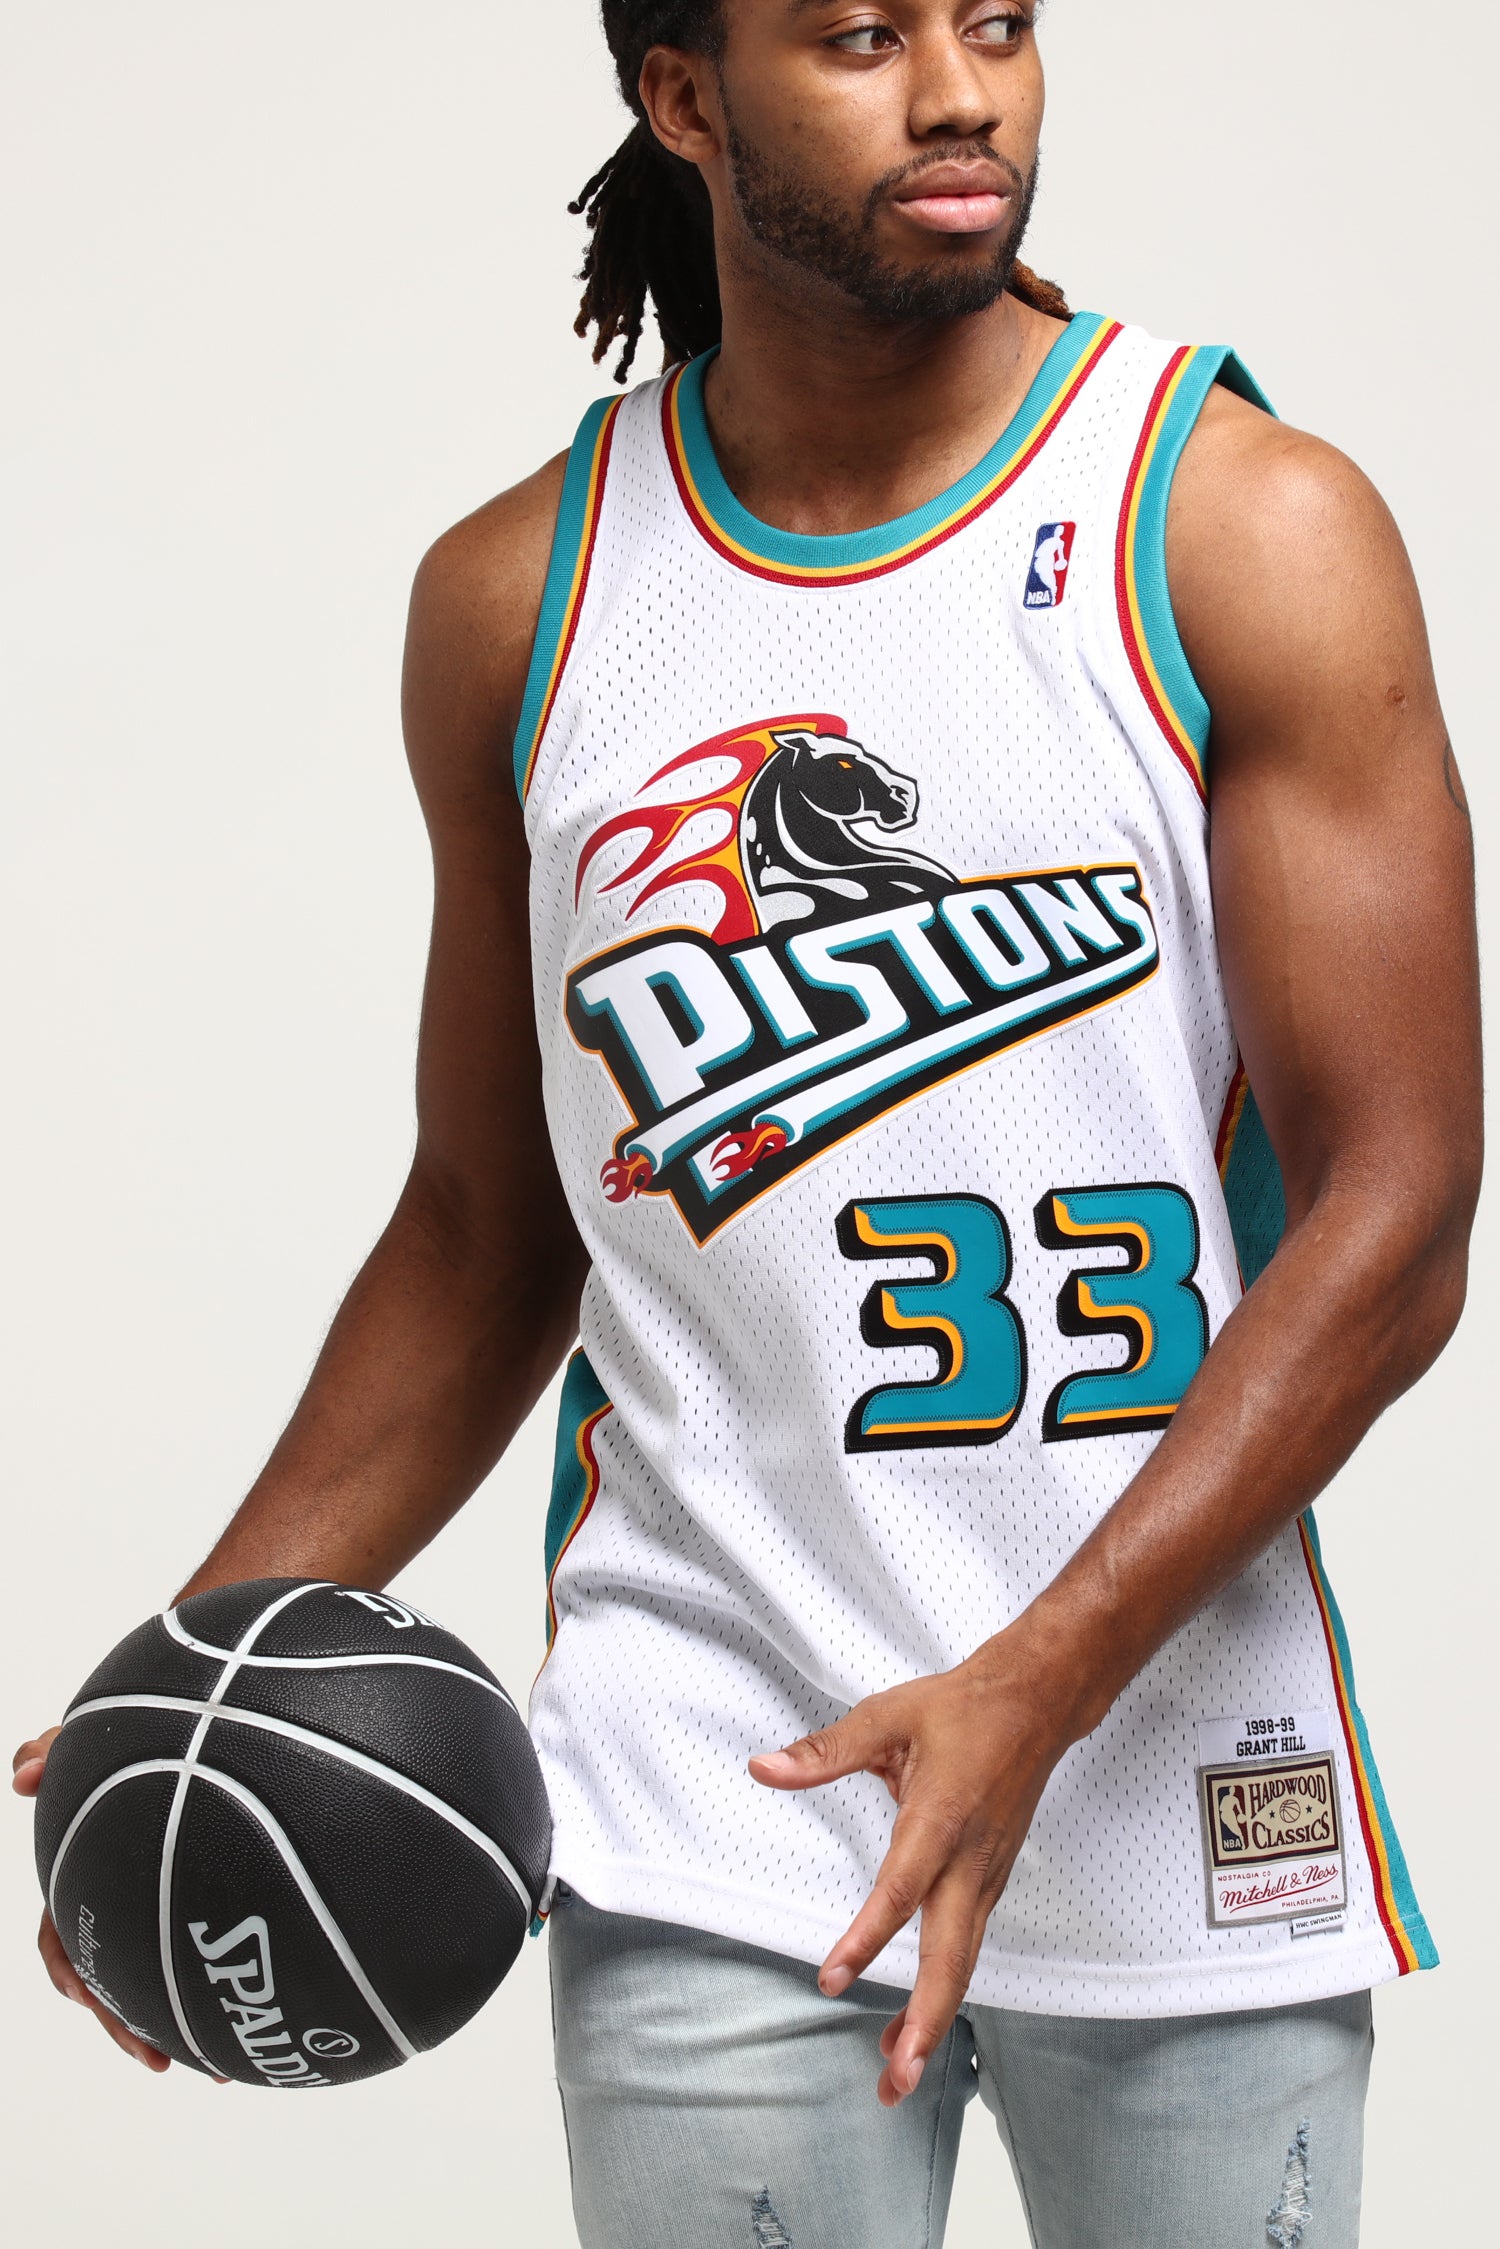 grant hill mitchell and ness jersey